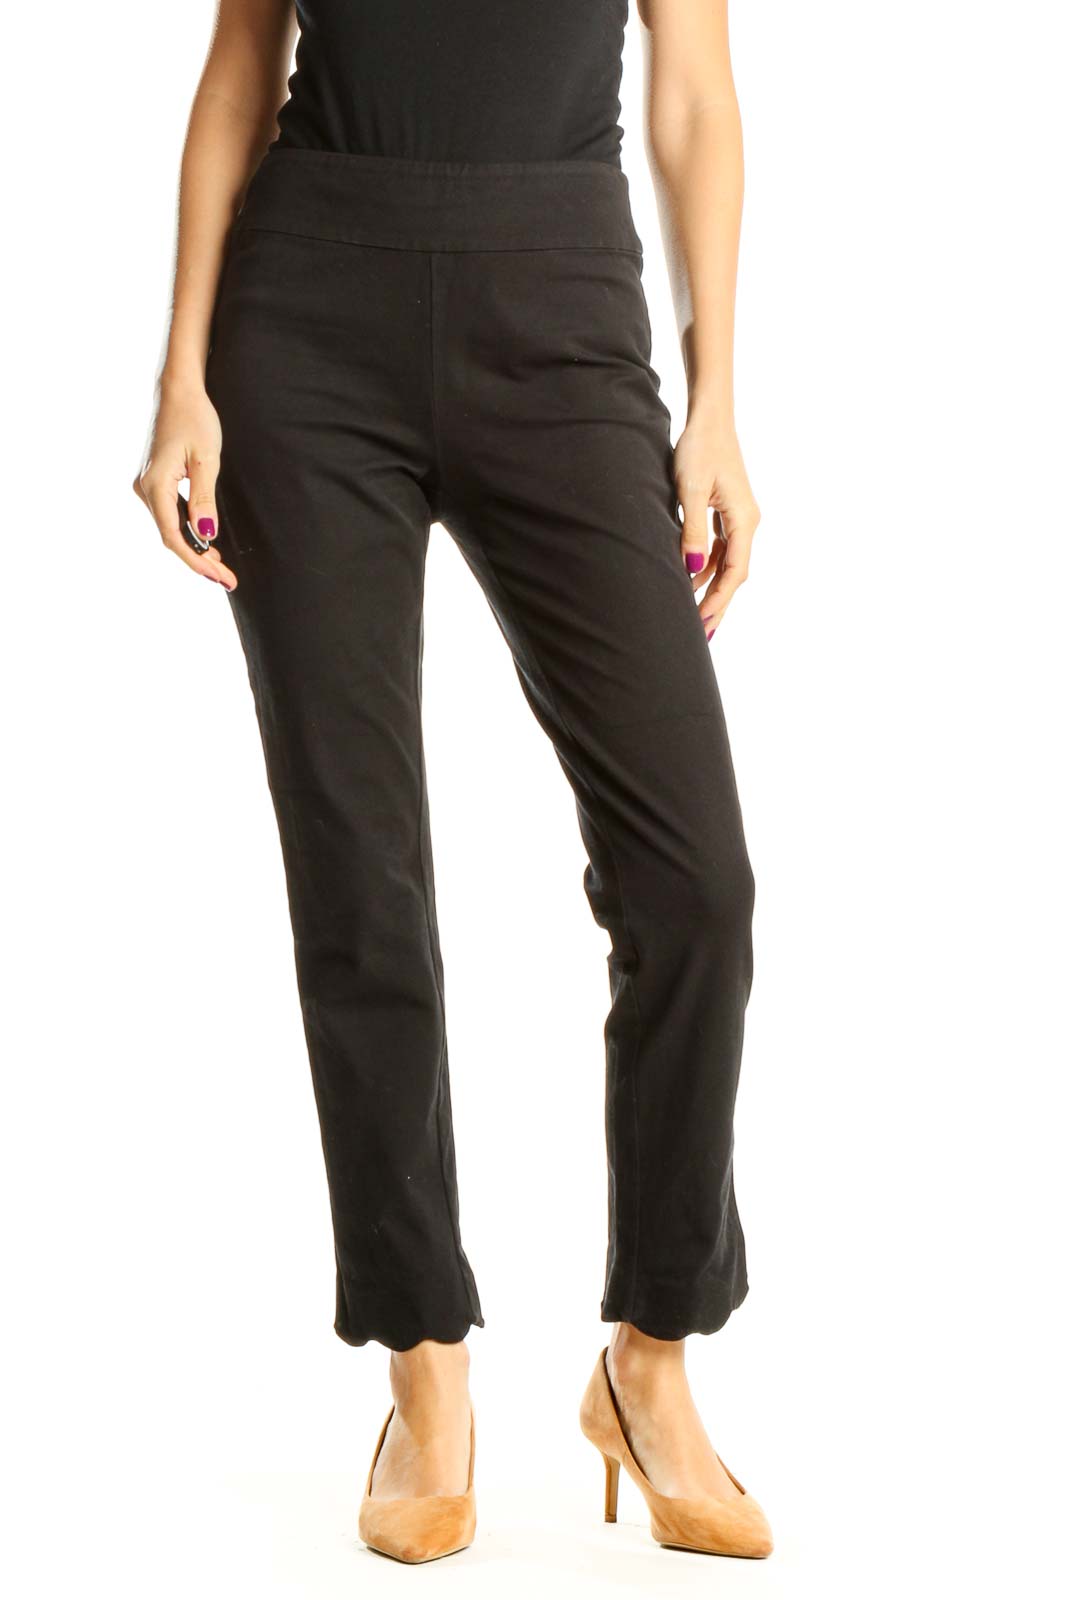 Black Textured All Day Wear Trousers with Scallop Trim Front